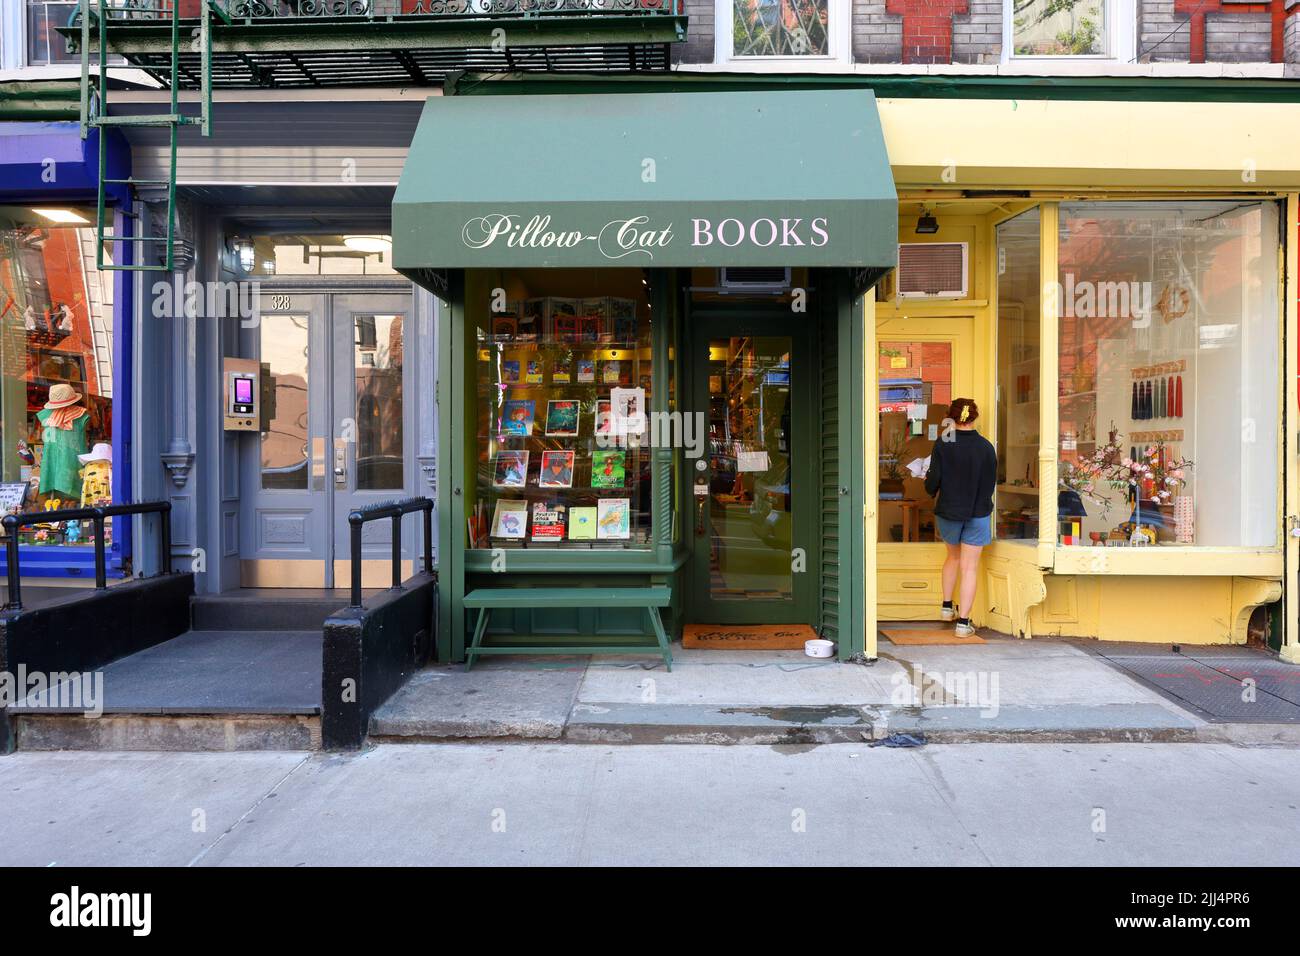 Pillow-Cat Books, 328 E 9th St, New York, NY. exterior storefront of an animal focused bookstore in the East Village neighborhood in Manhattan. Stock Photo